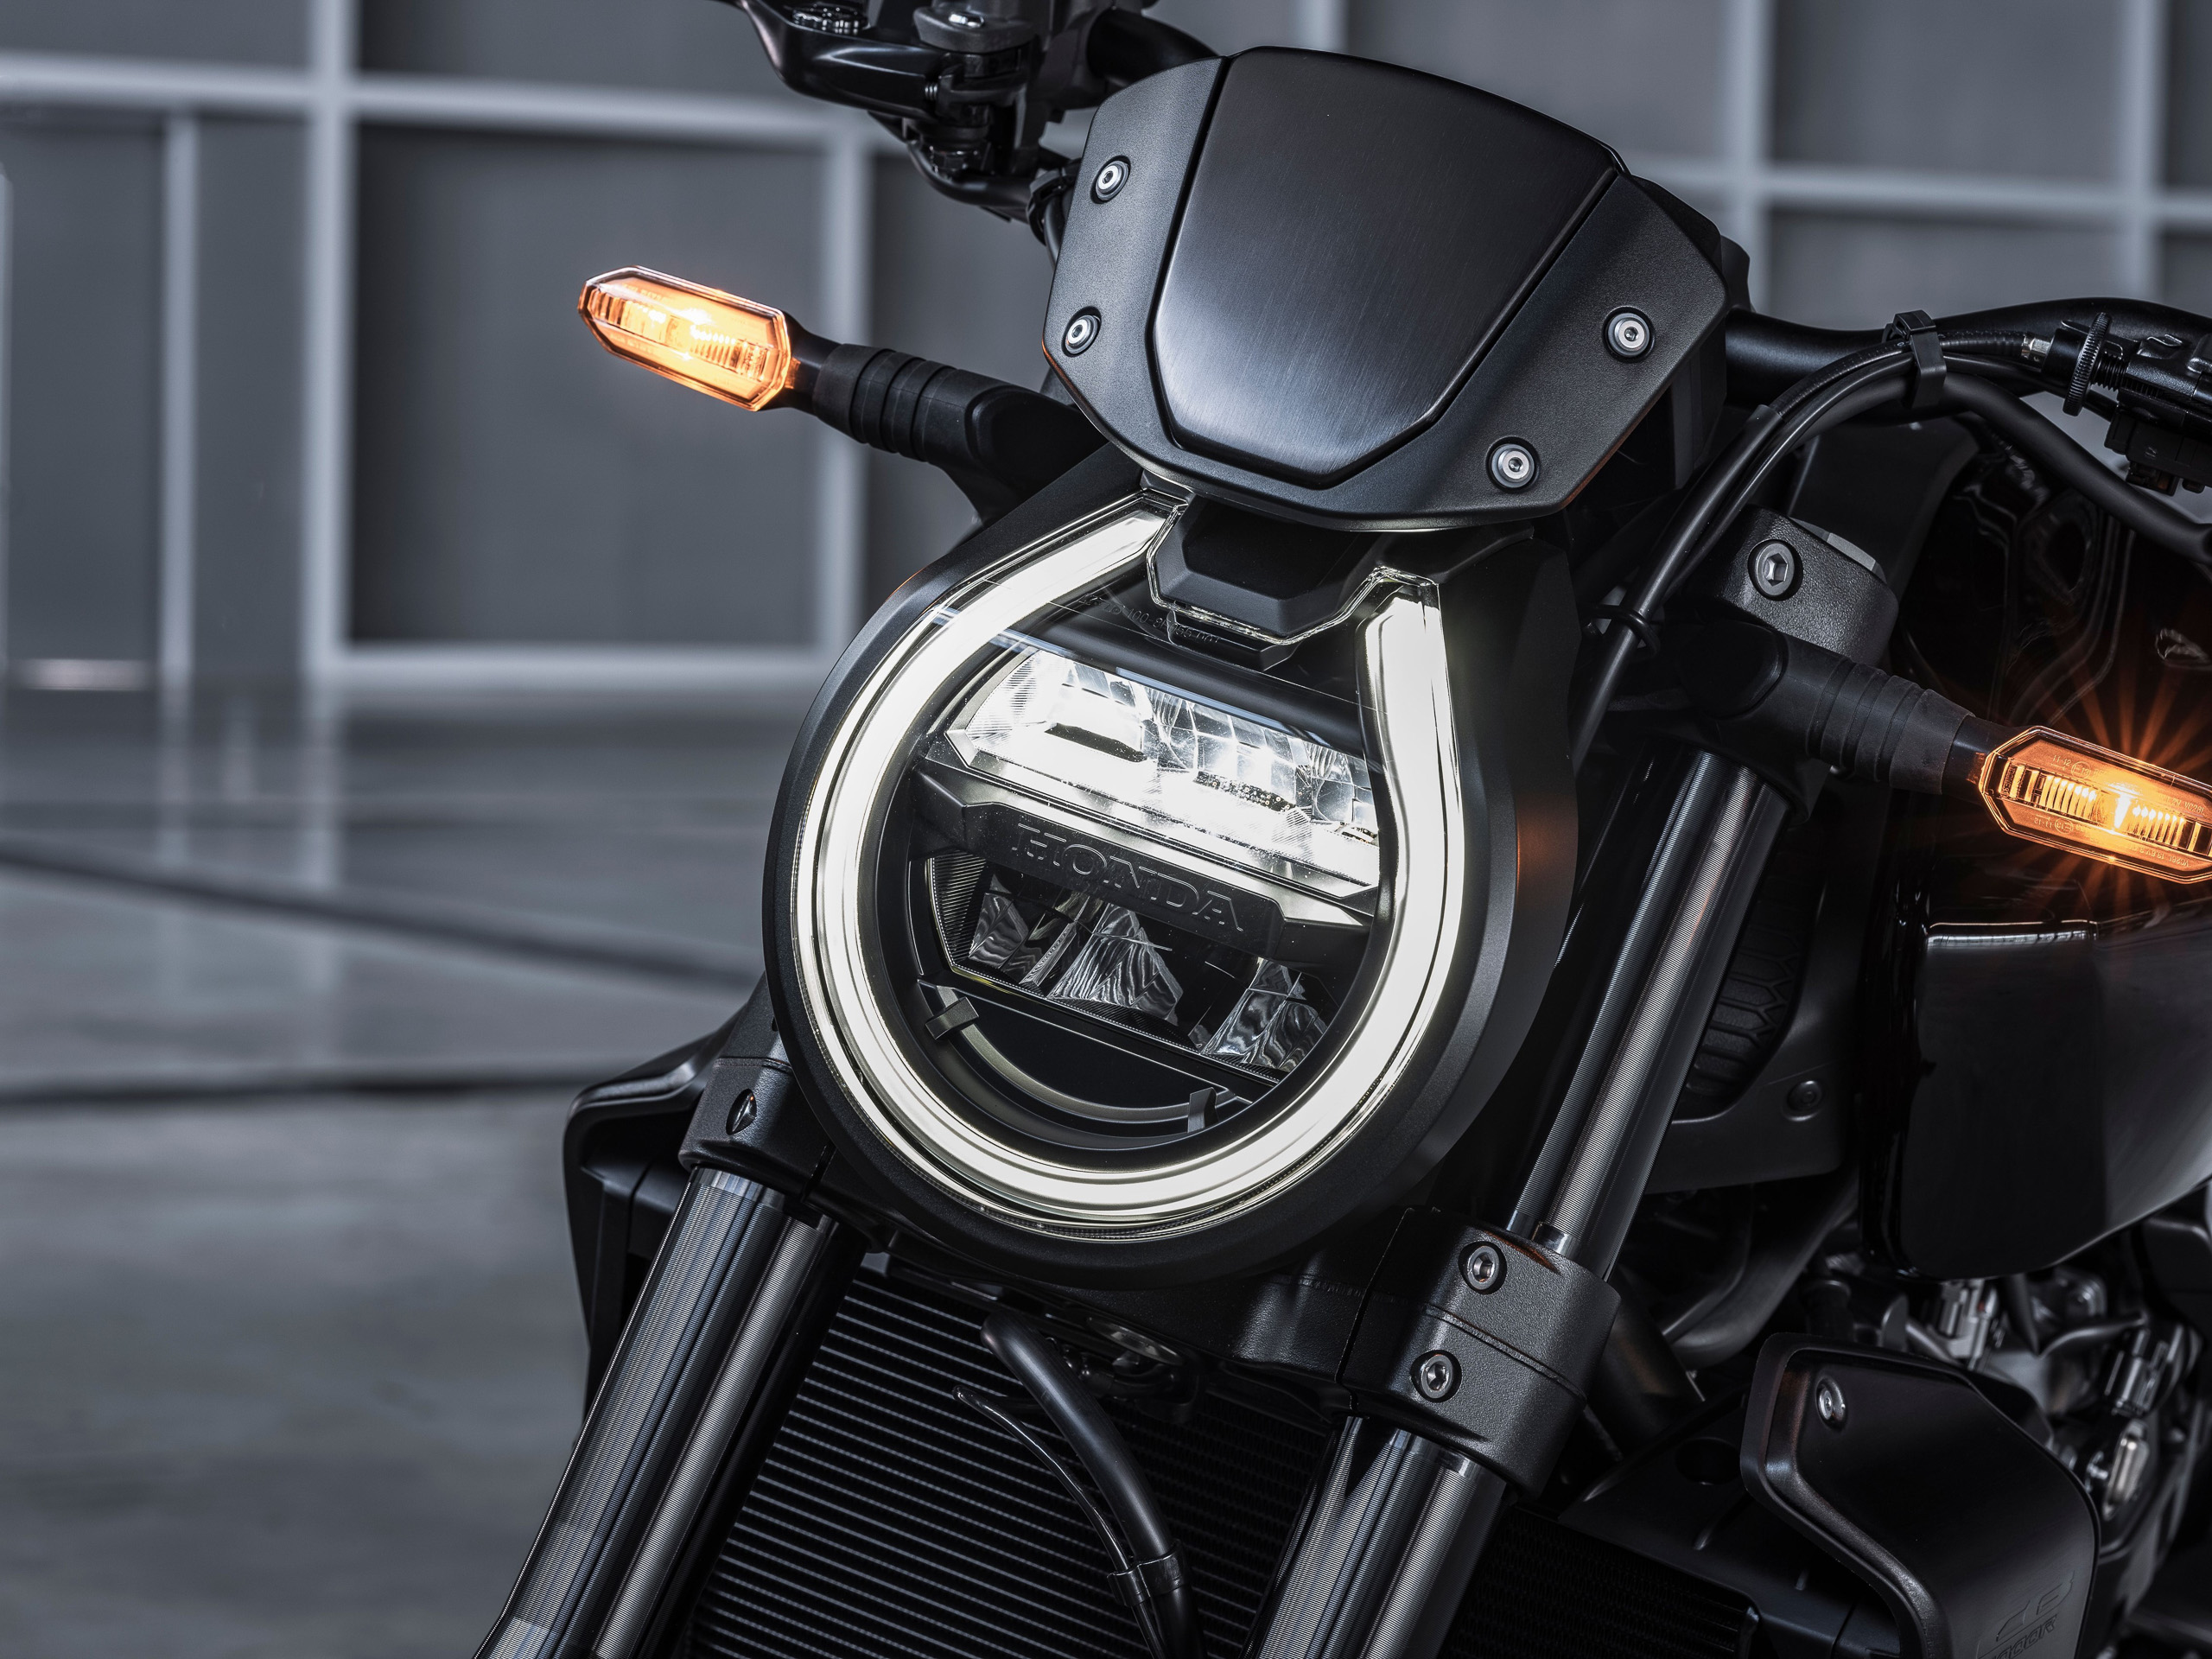 2021 Honda CB1000R model update – now comes with LCD screen, new wheels